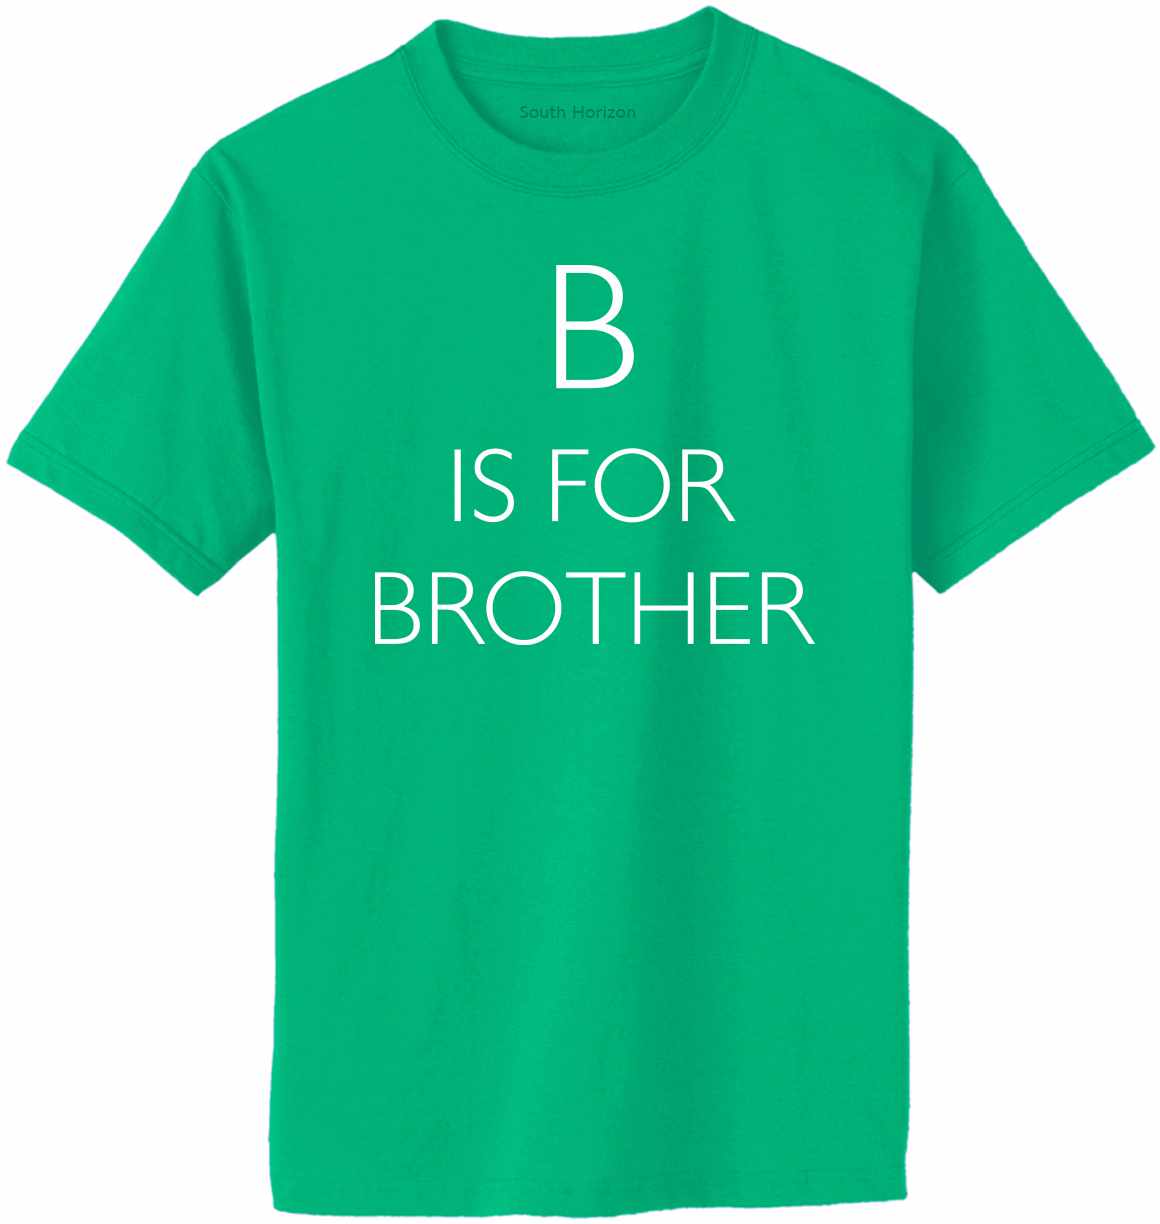 B is for Brother Adult T-Shirt (#1009-1)